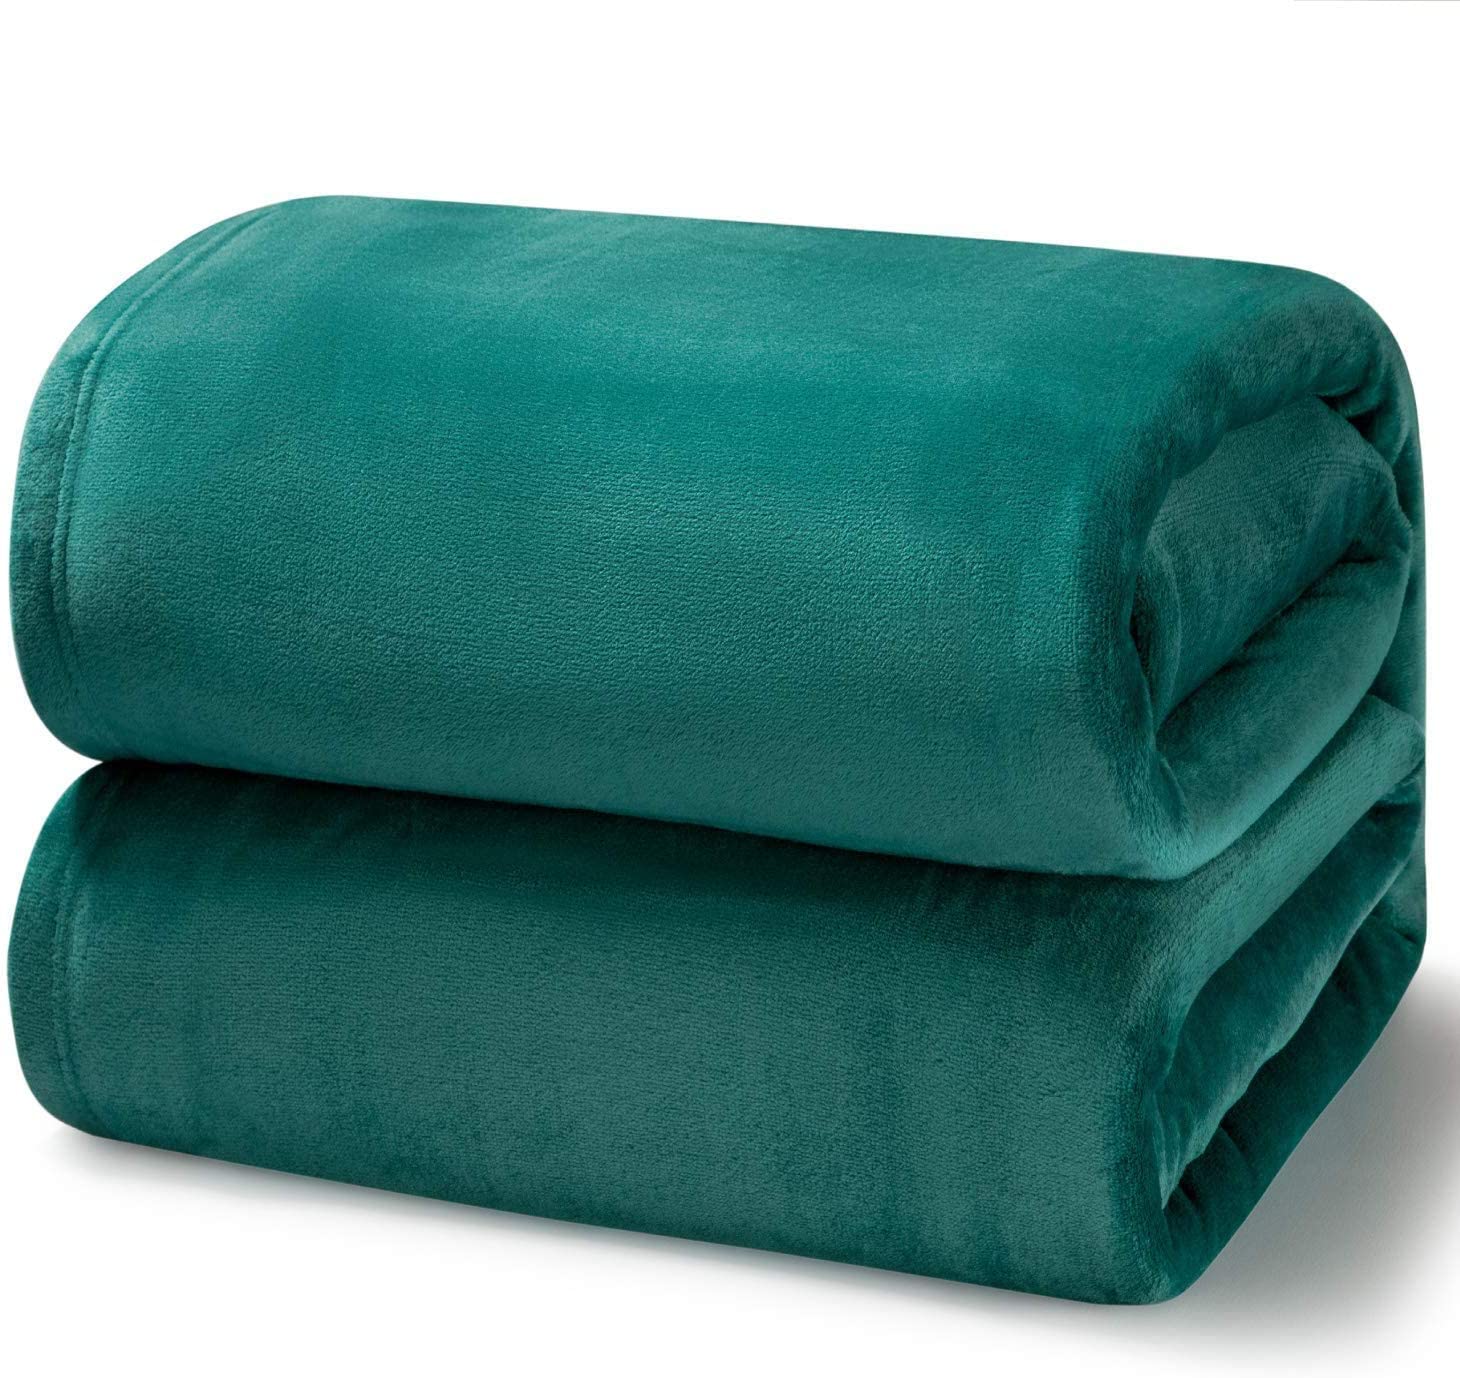 loomsmith-solid-double-AC-blanket-in-green-flannel-fabric-soft-in-touch-gift-item-as-token-of-love-comfy